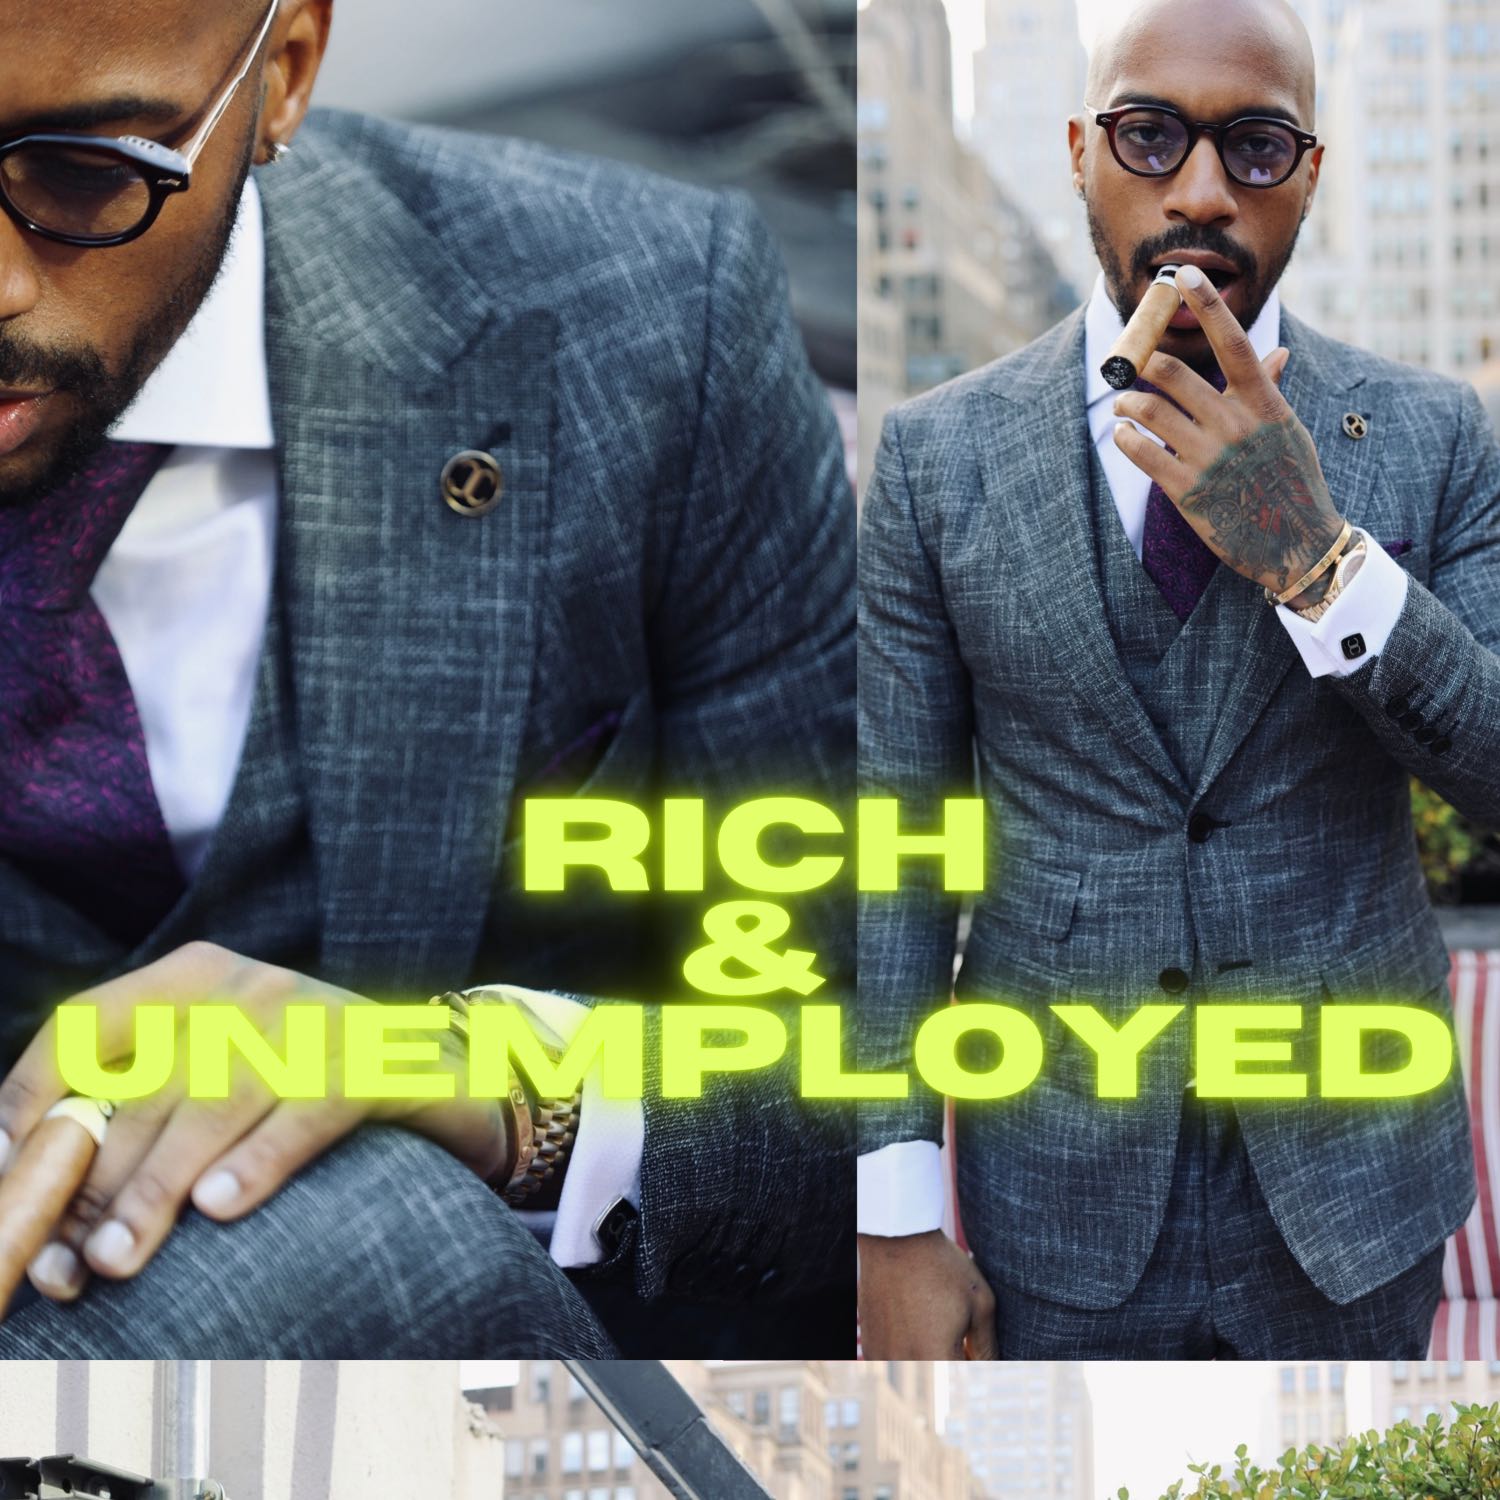 Rich & Unemployed "The Podcast"